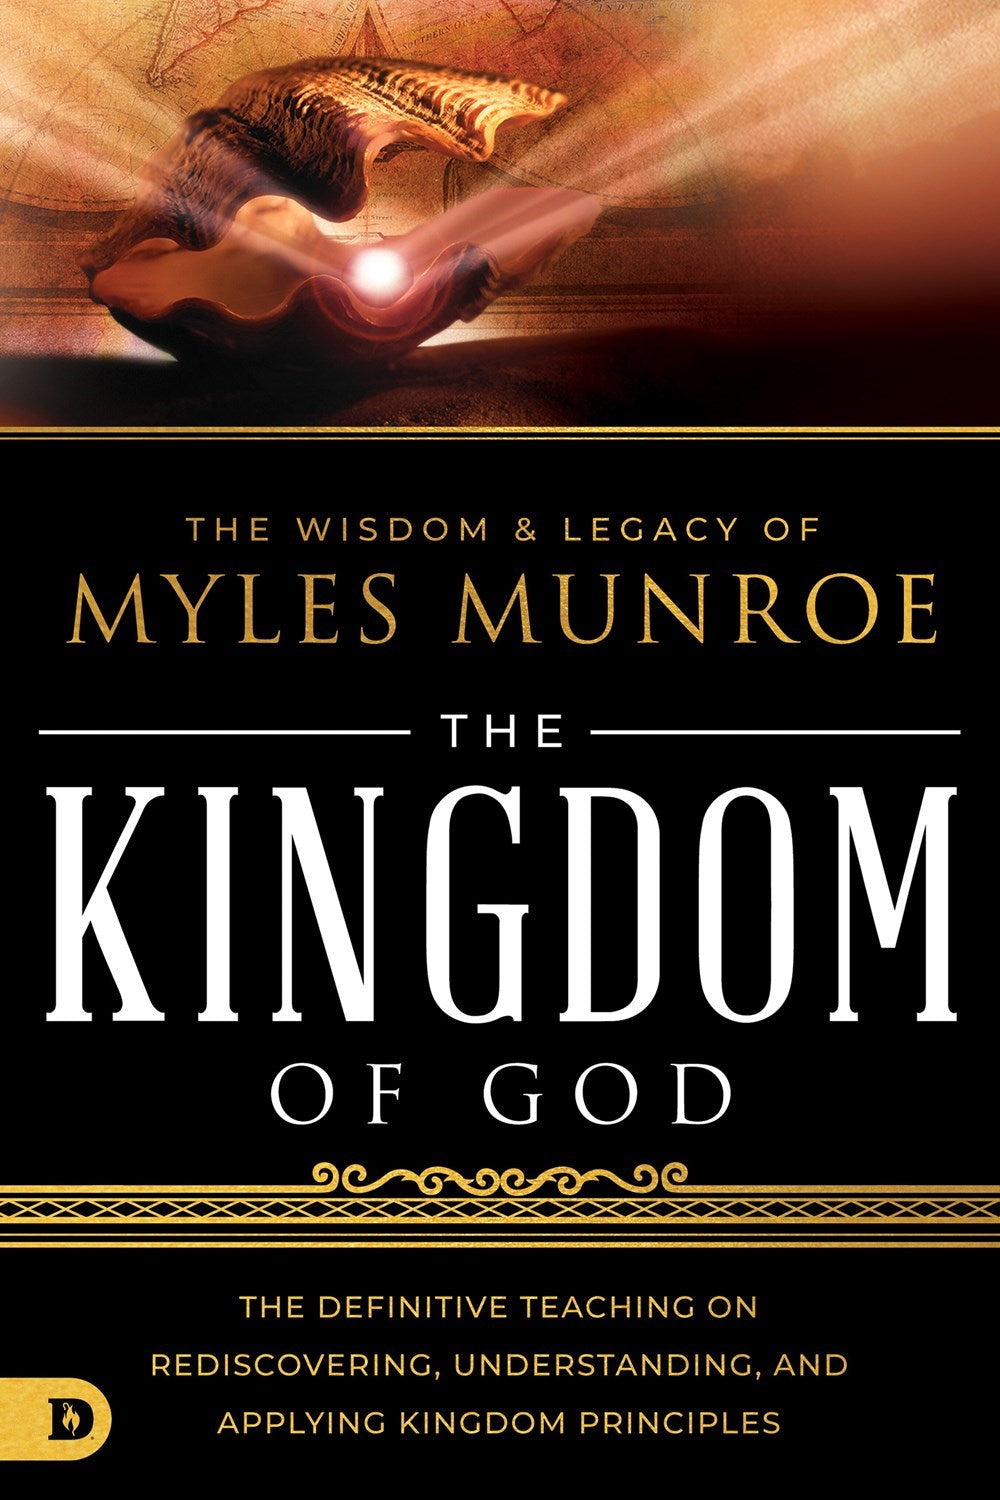 Seed of Abraham Christian Bookstore - Myles Munroe - The Wisdom and Legacy of Myles Munroe: The Kingdom of God (June 2023)